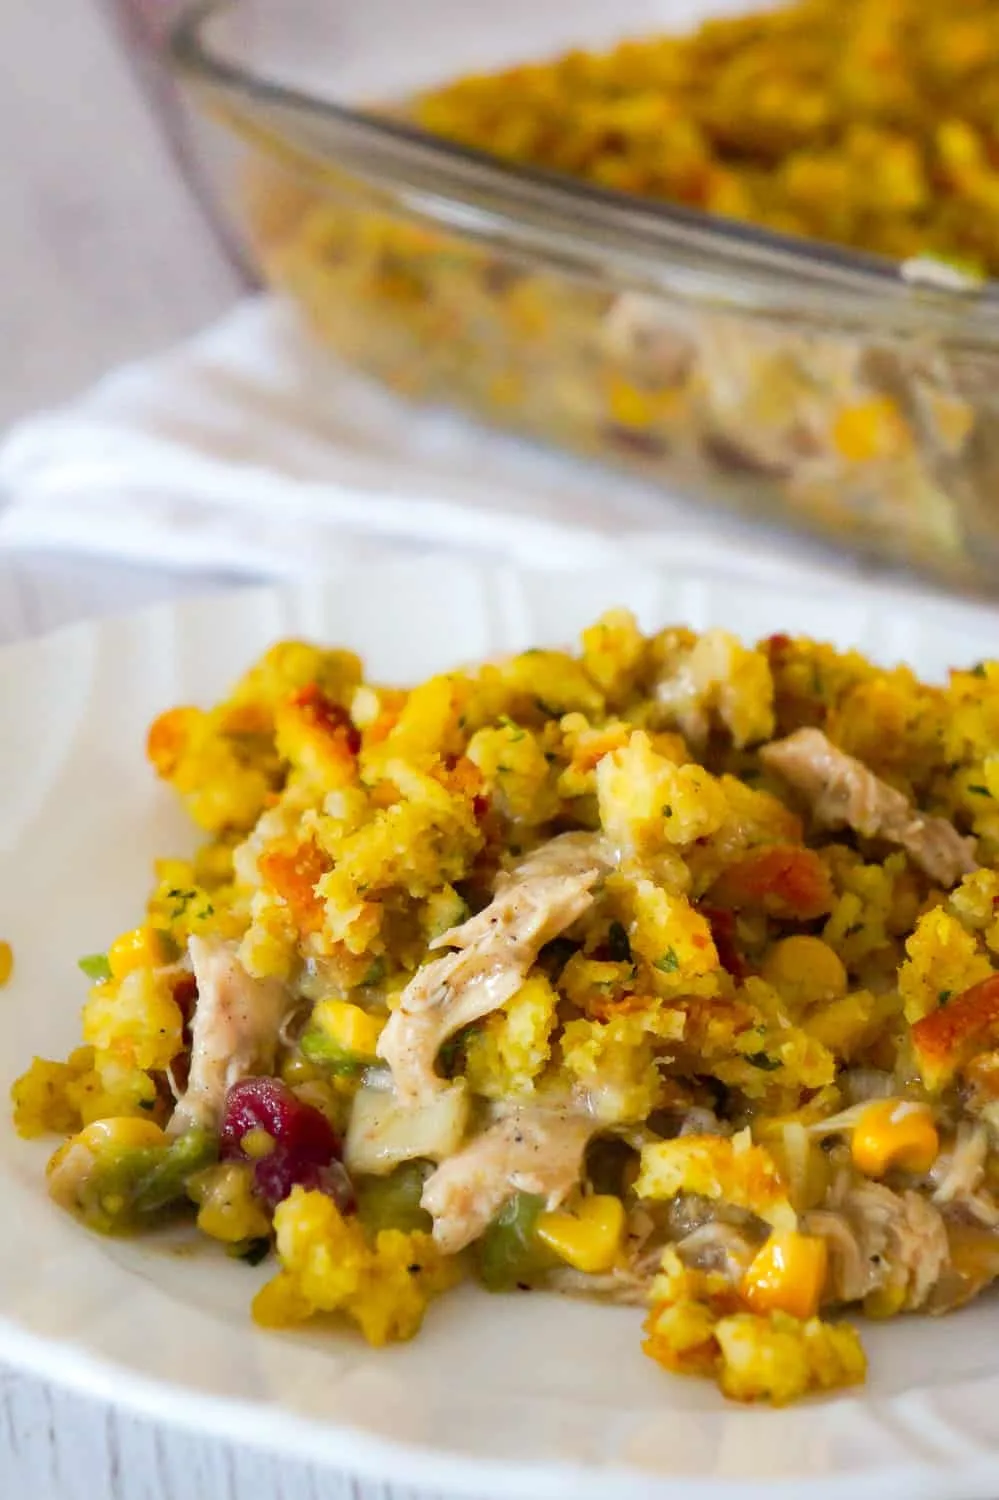 Chicken Casserole with Stuffing is an easy chicken dinner recipe perfect for weeknights. This hearty chicken casserole is loaded with shredded rotisserie chicken, corn, green onions and cranberry sauce and topped with stove top stuffing.